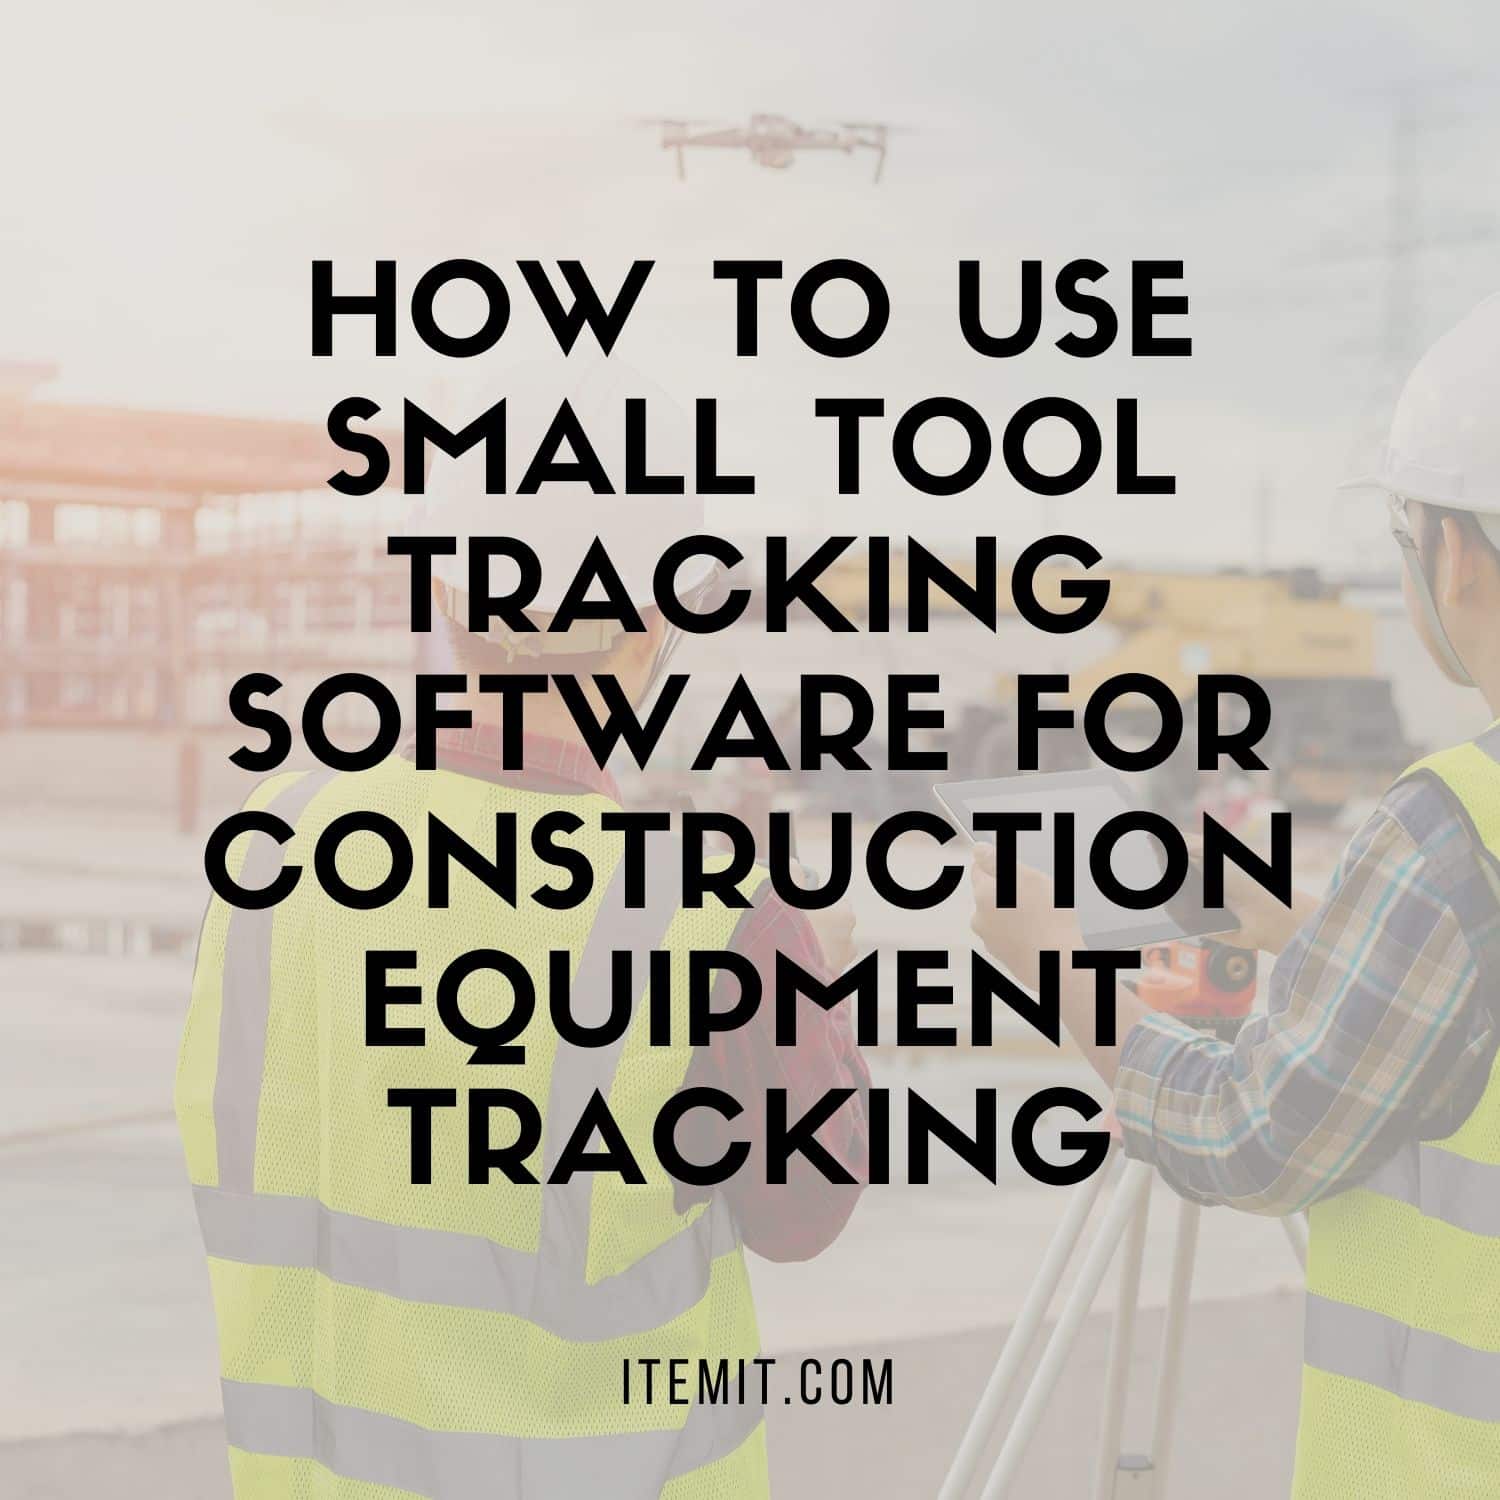 How to Use Small Tool Tracking Software for Construction Equipment Tracking